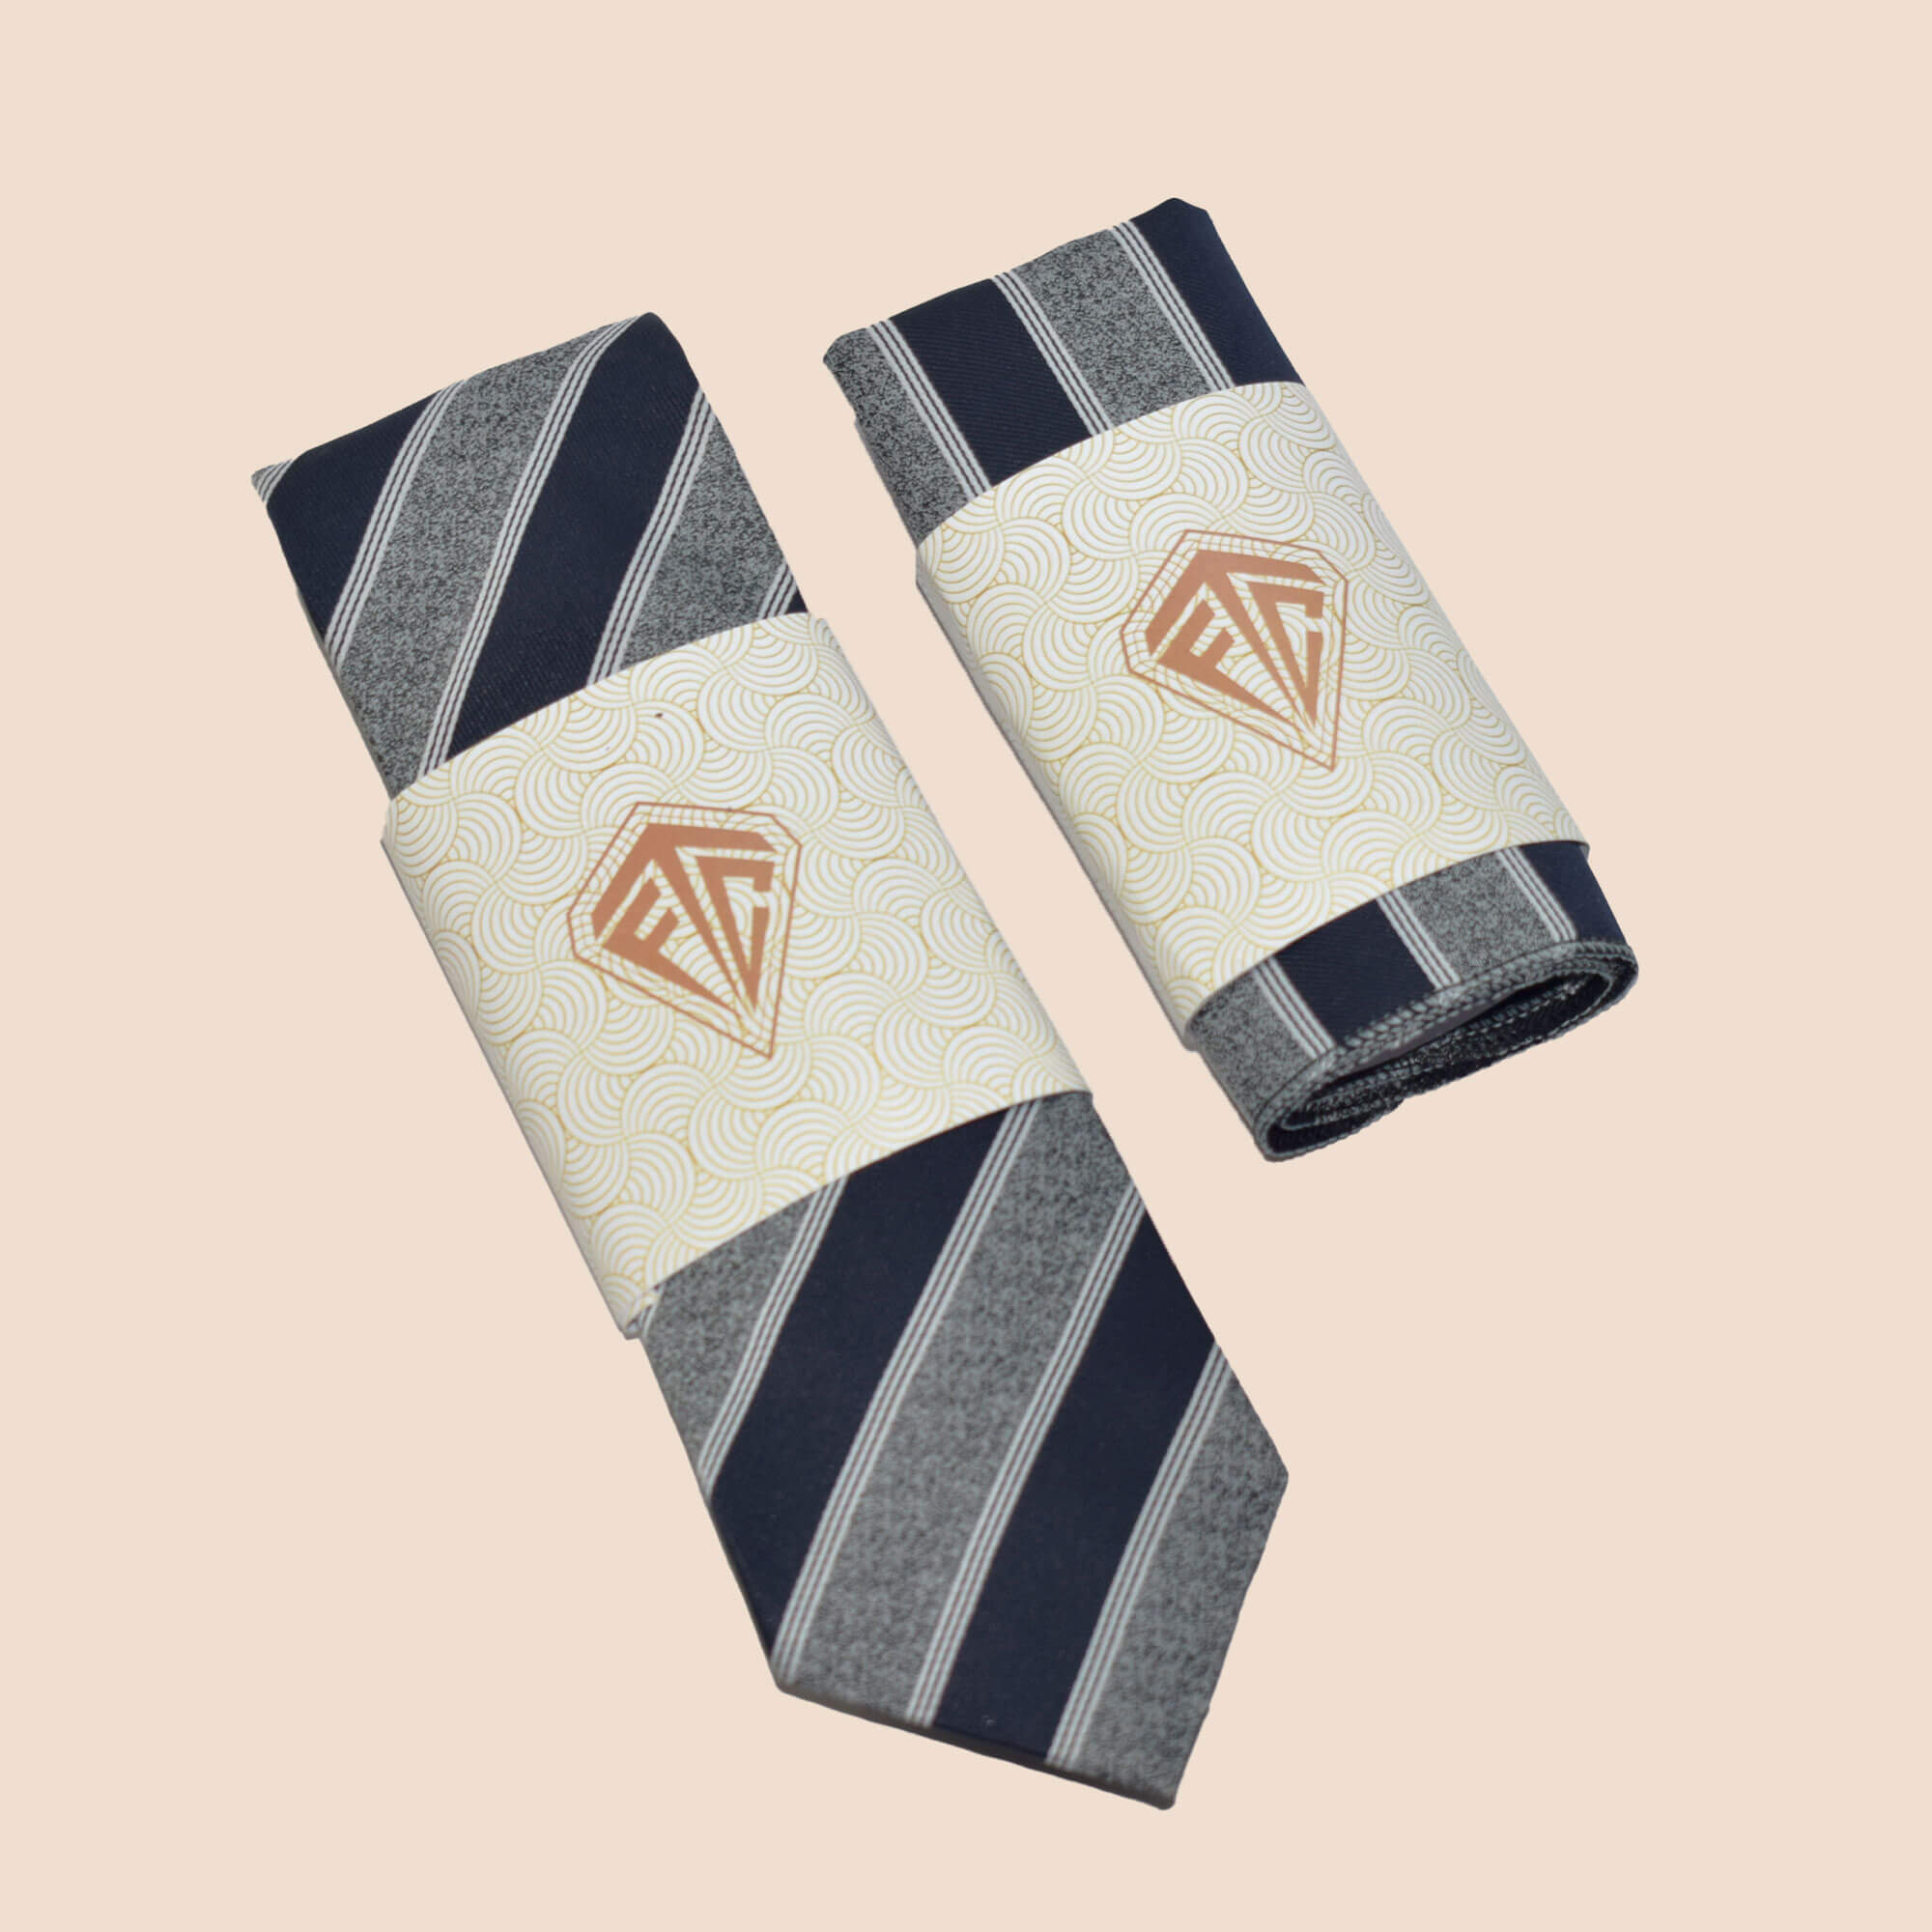 Imperial striped handmade Tie and Pocket Square Set in Blue & Grey